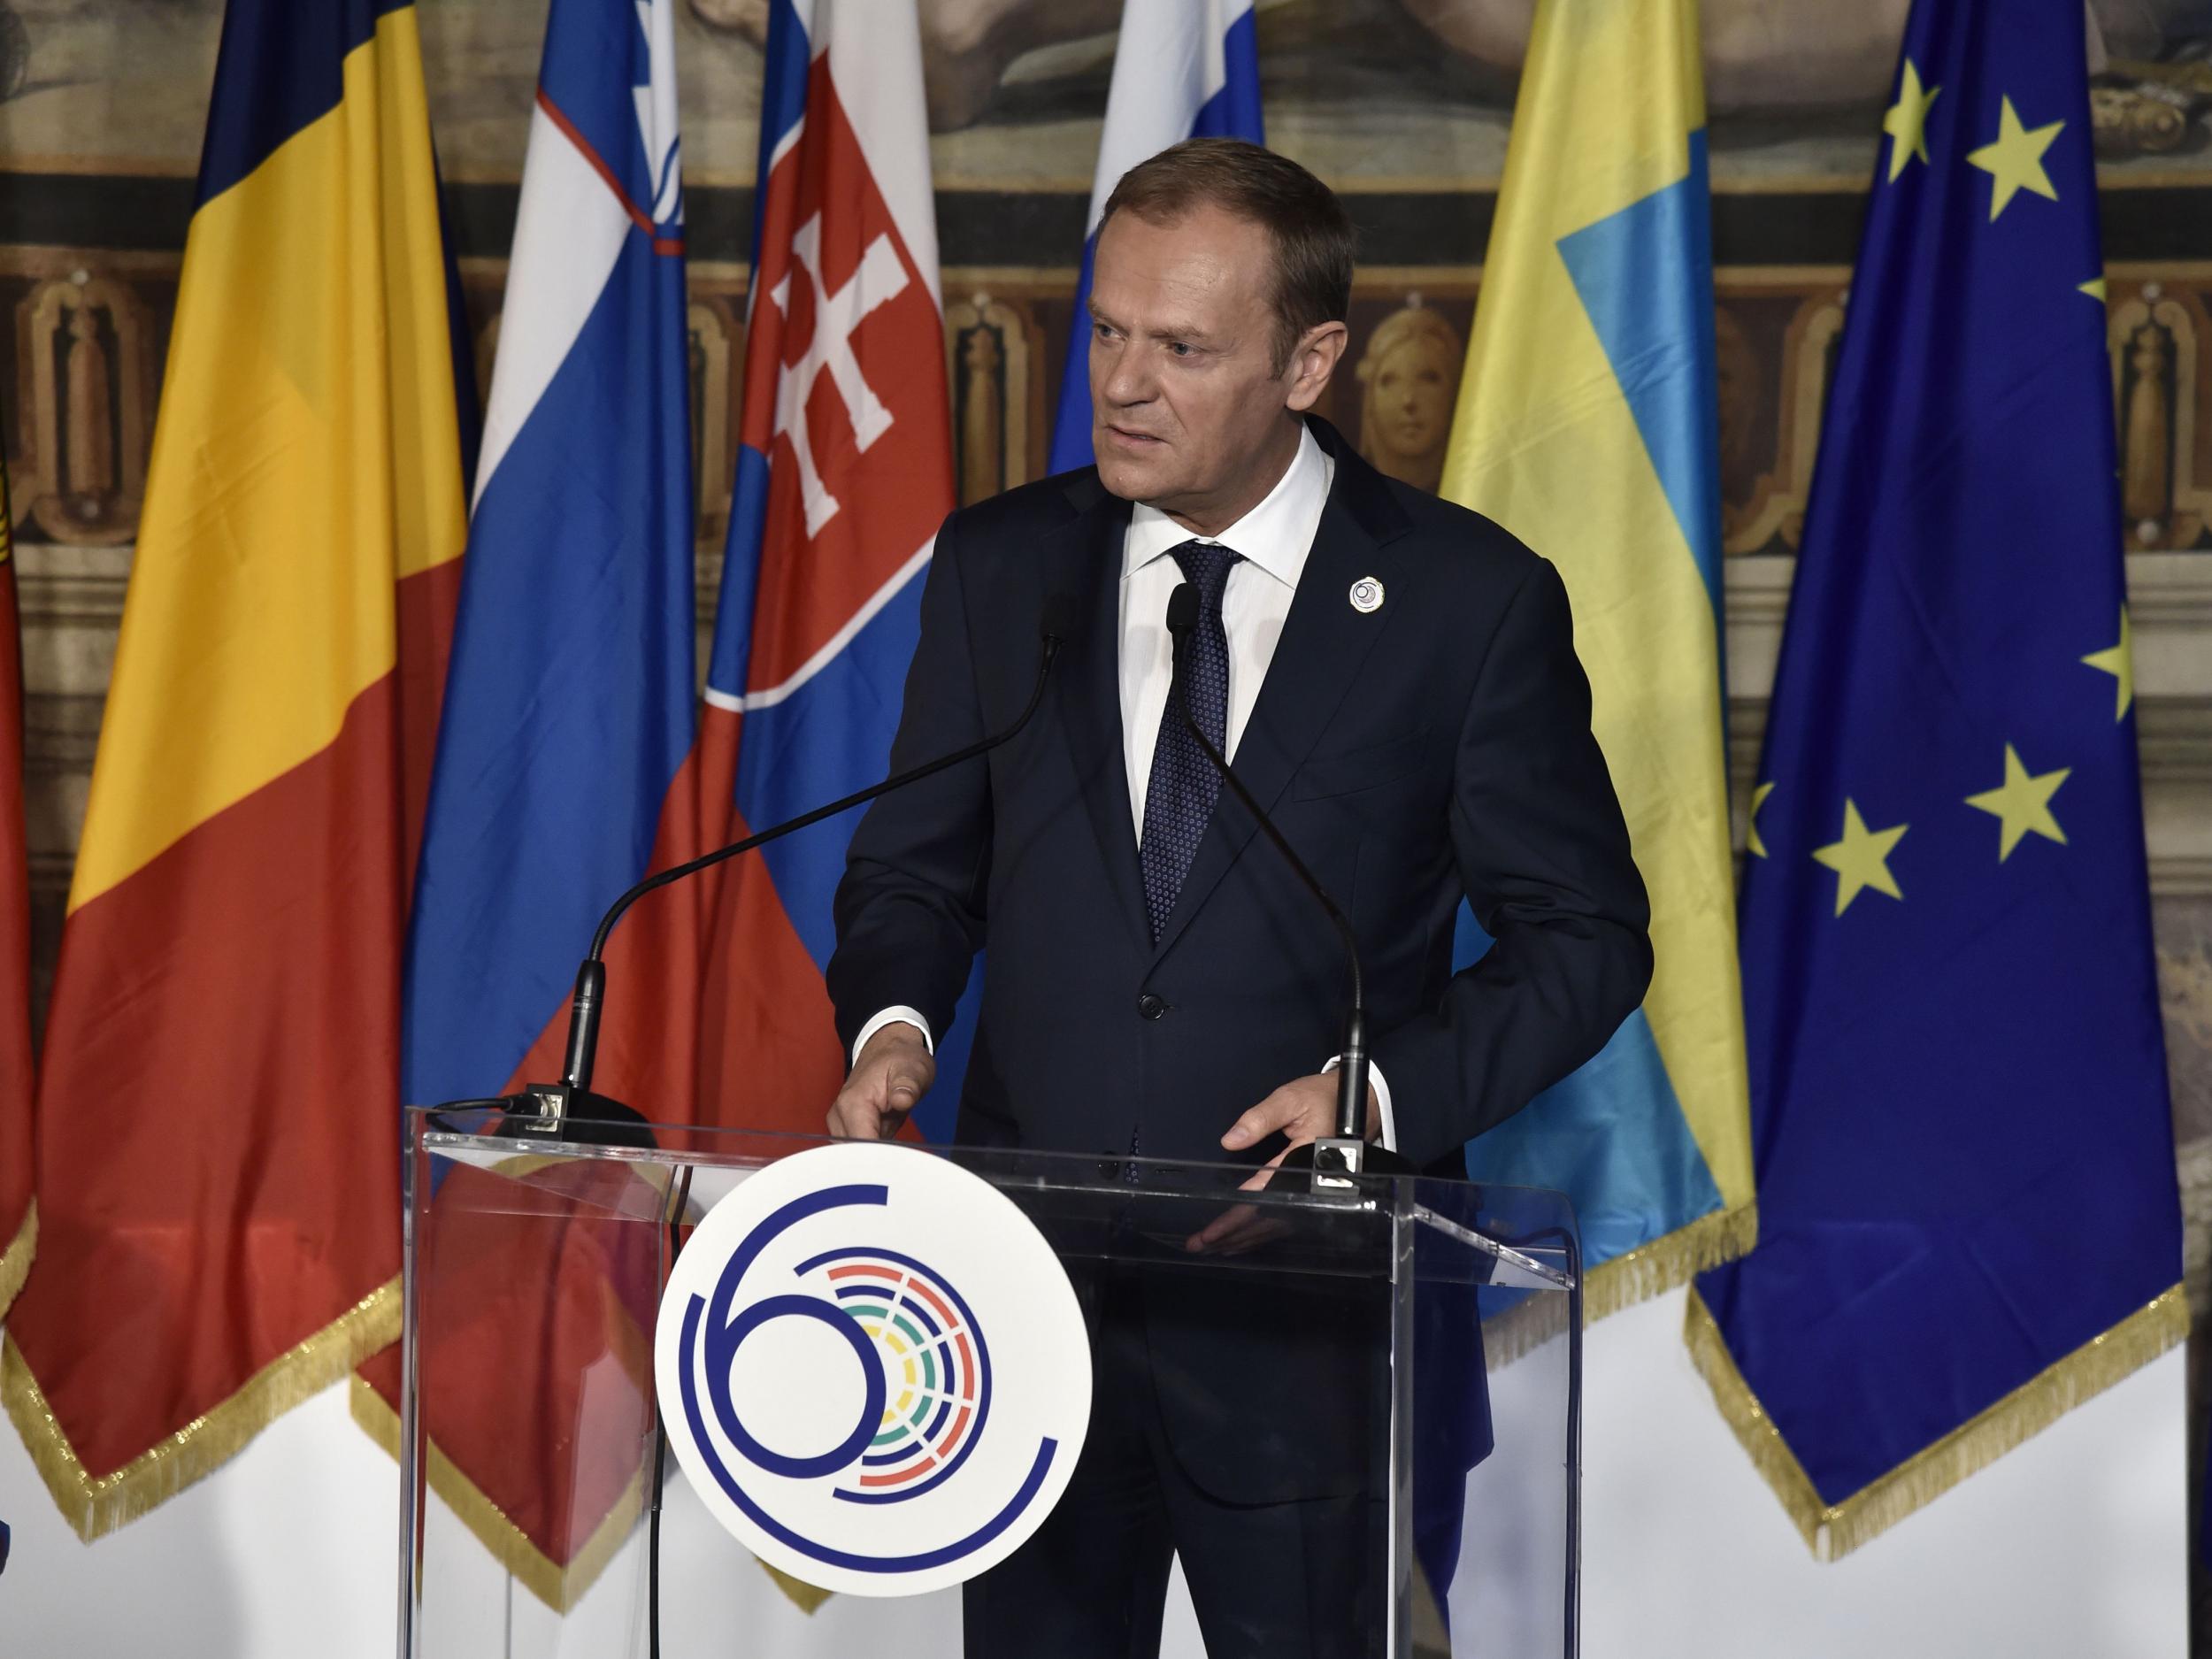 European Council President Donald Tusk delivers a speech during a special summit of EU leaders to mark the 60th anniversary of the bloc's founding Treaty of Rome